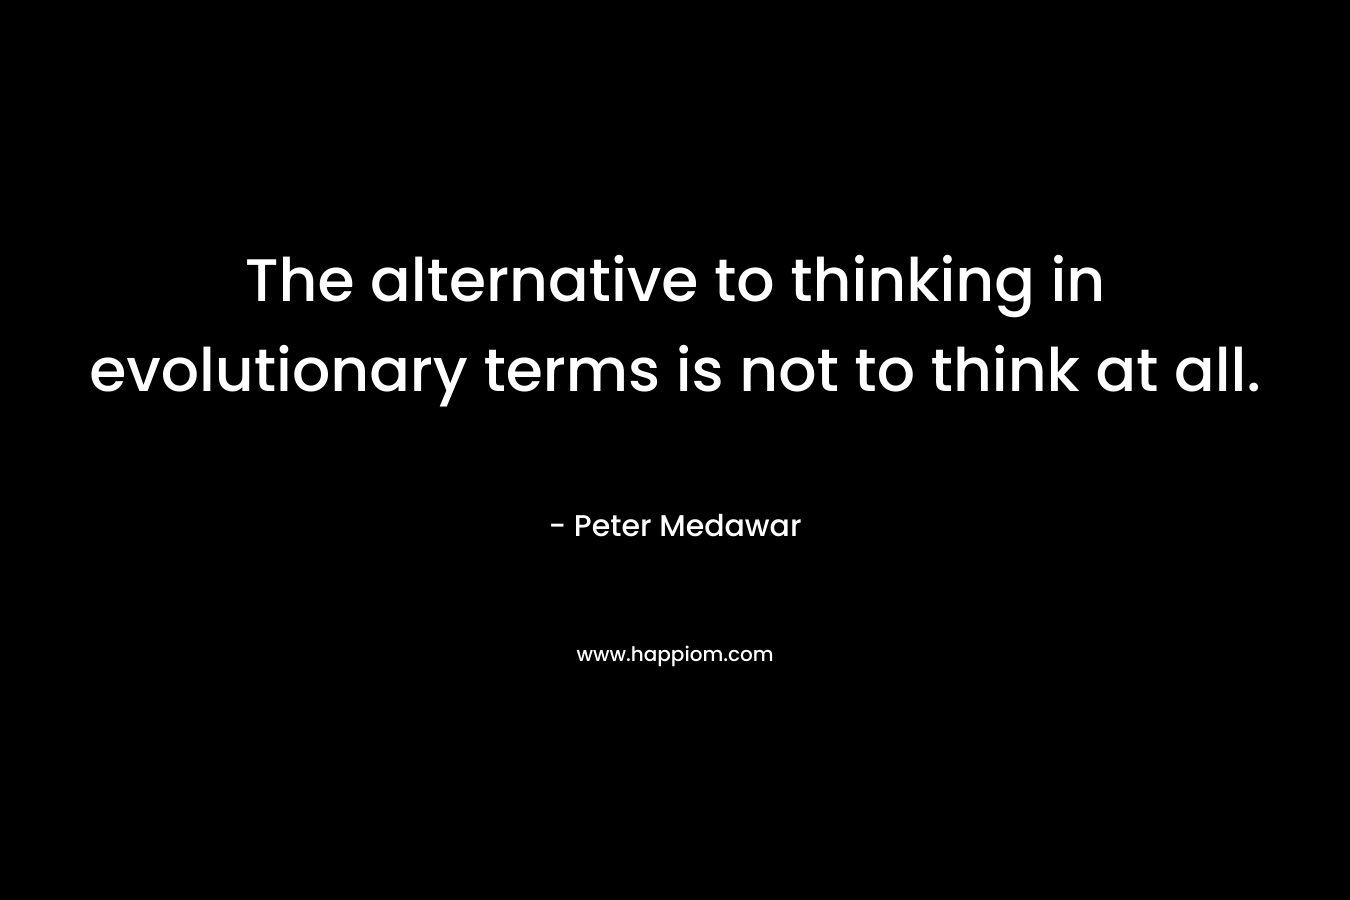 The alternative to thinking in evolutionary terms is not to think at all.